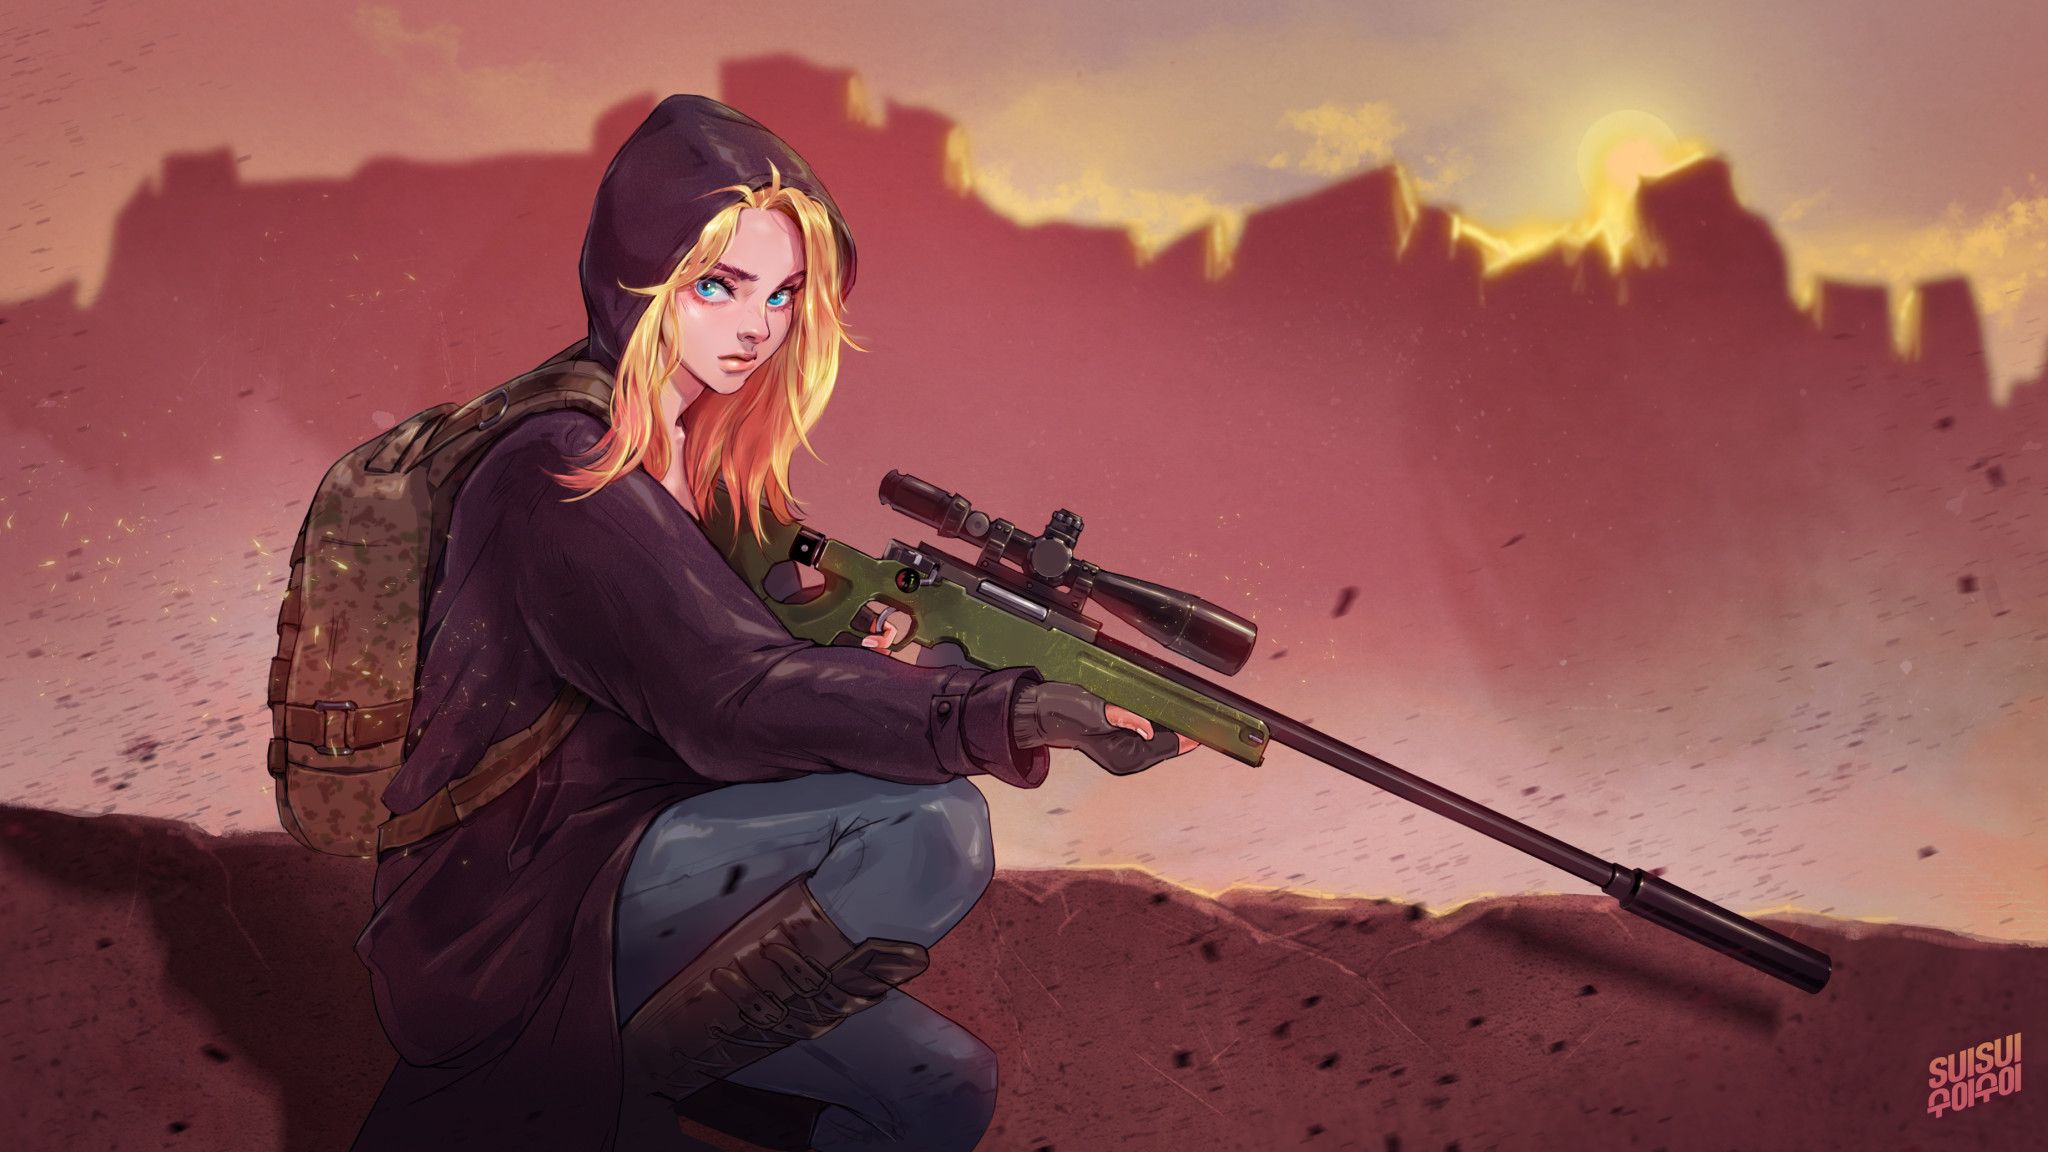 2048x1152 Pubg Game Girl Fanart 2048x1152 Resolution HD 4k Wallpapers, Image, Backgrounds